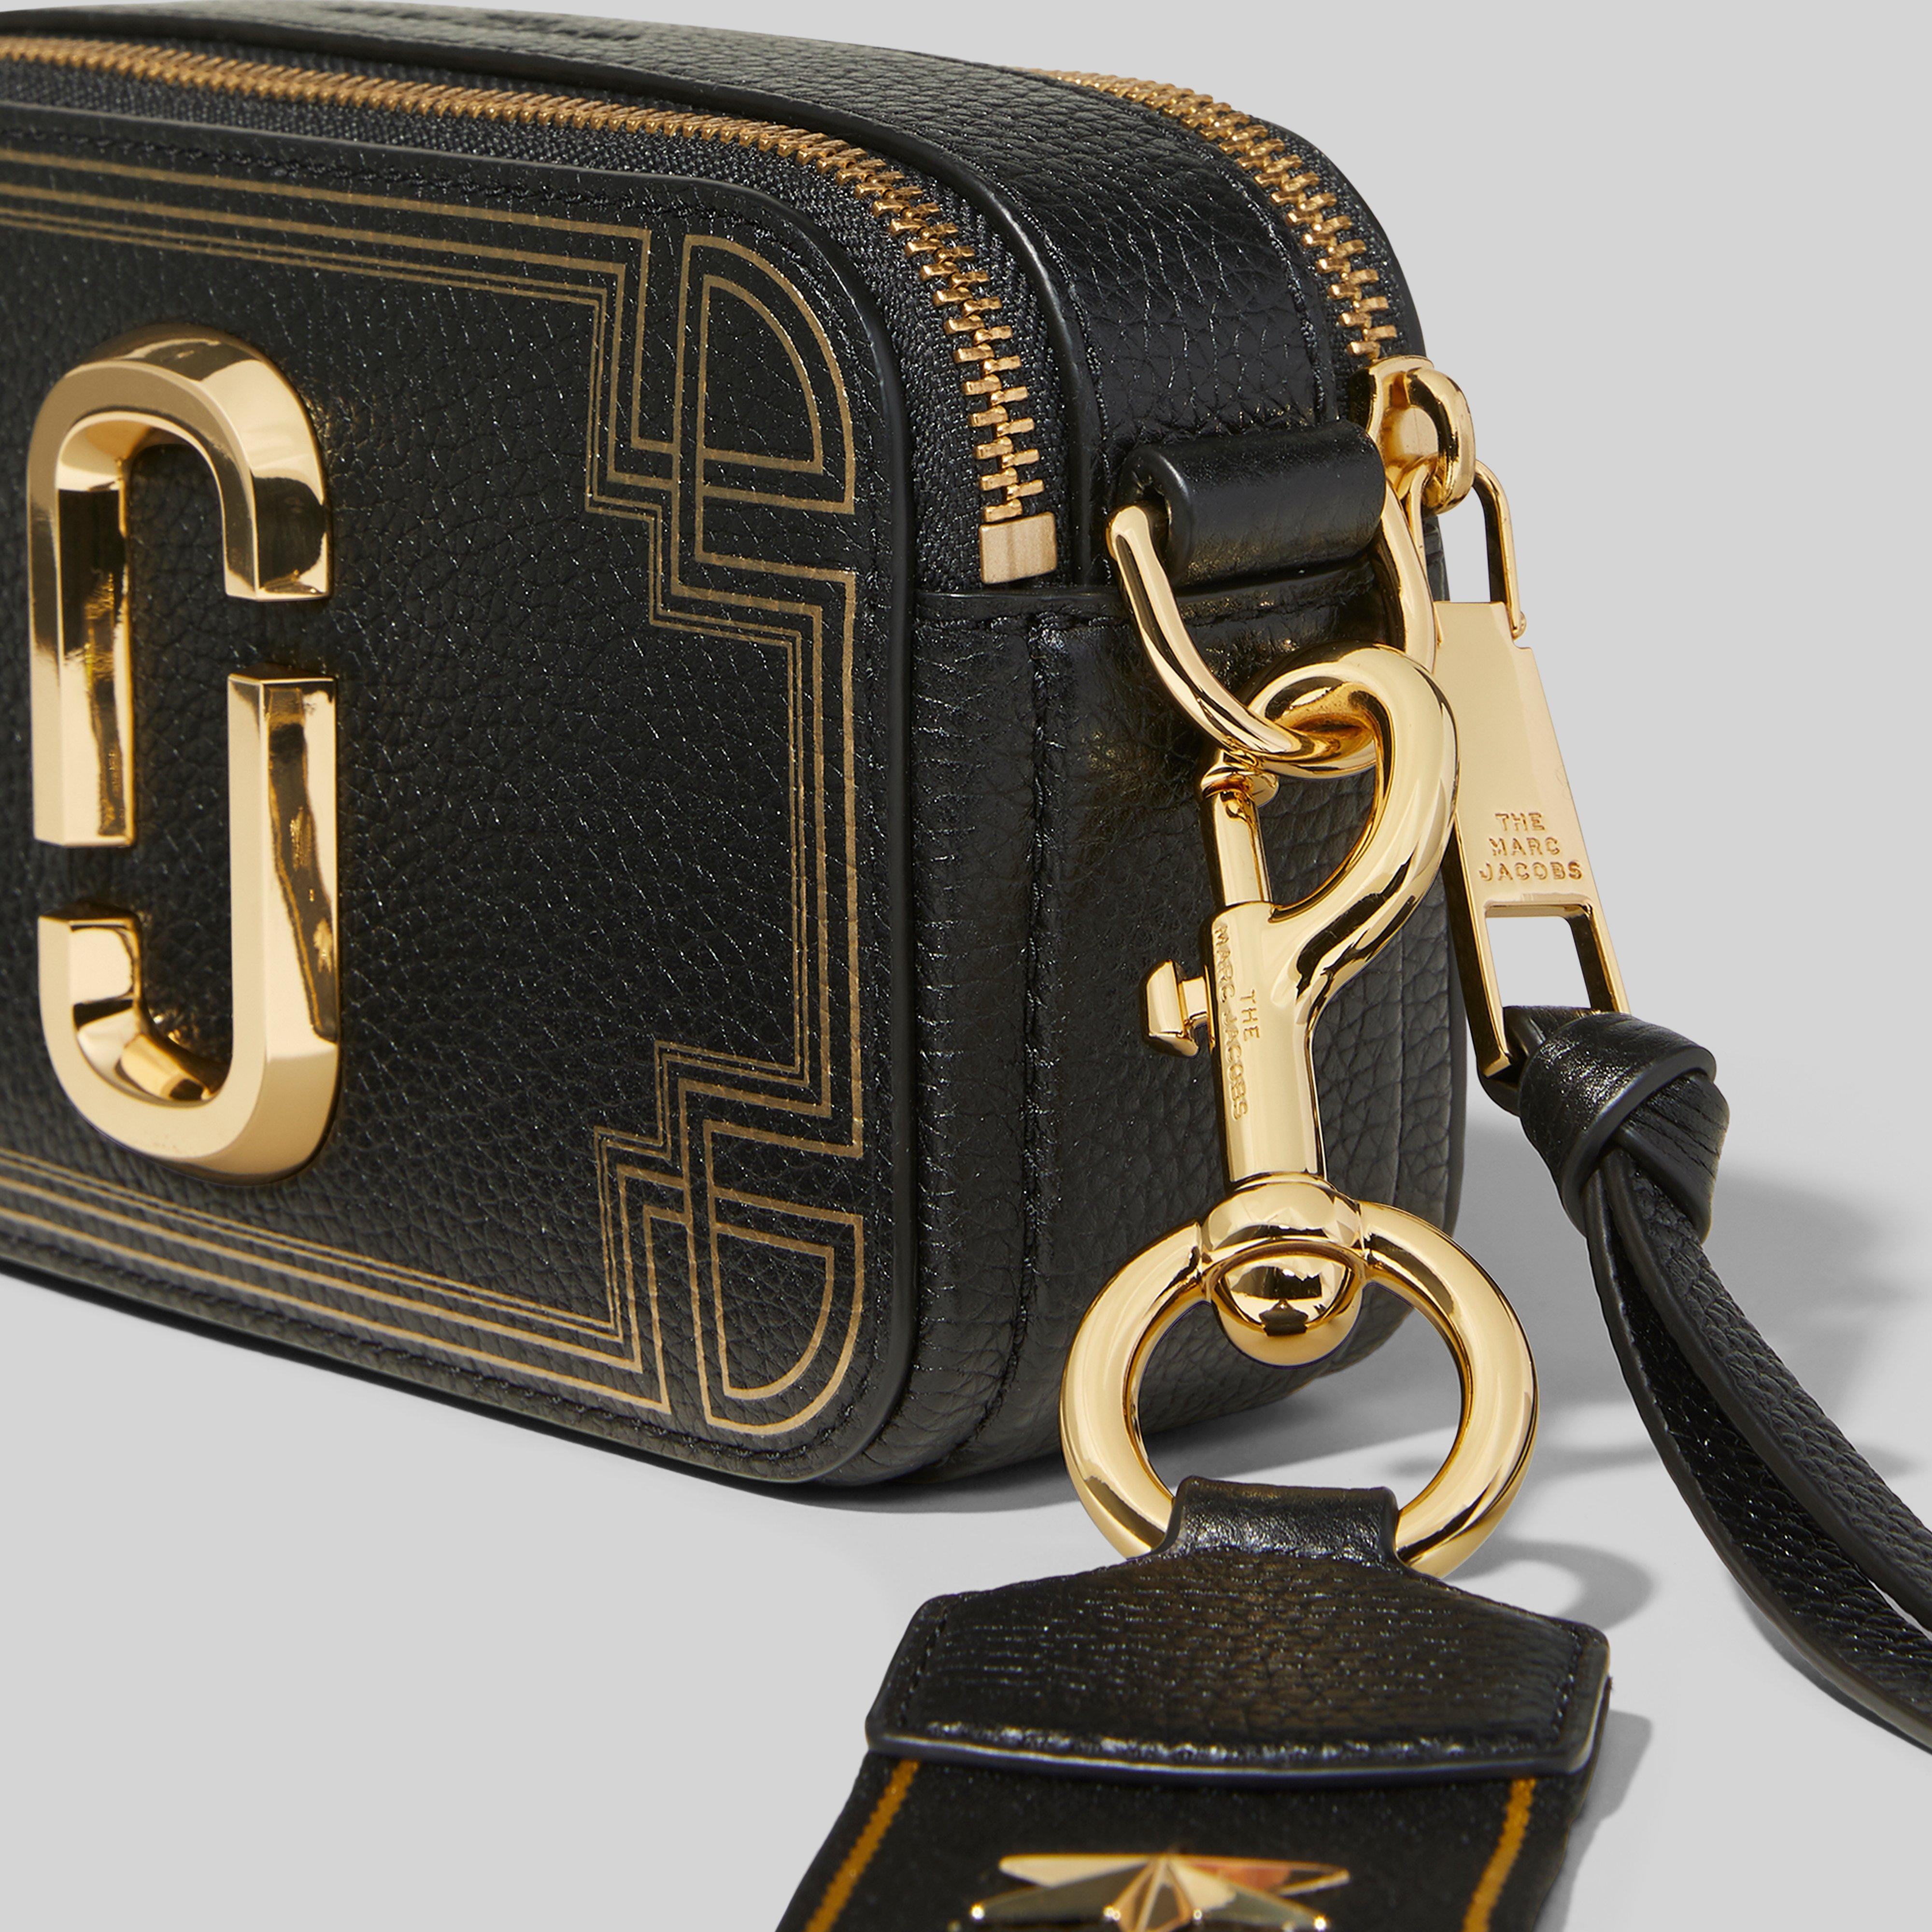 Marc Jacobs, Bags, Nwt Marc Jacobs Snapshot Gilded Camera Bag